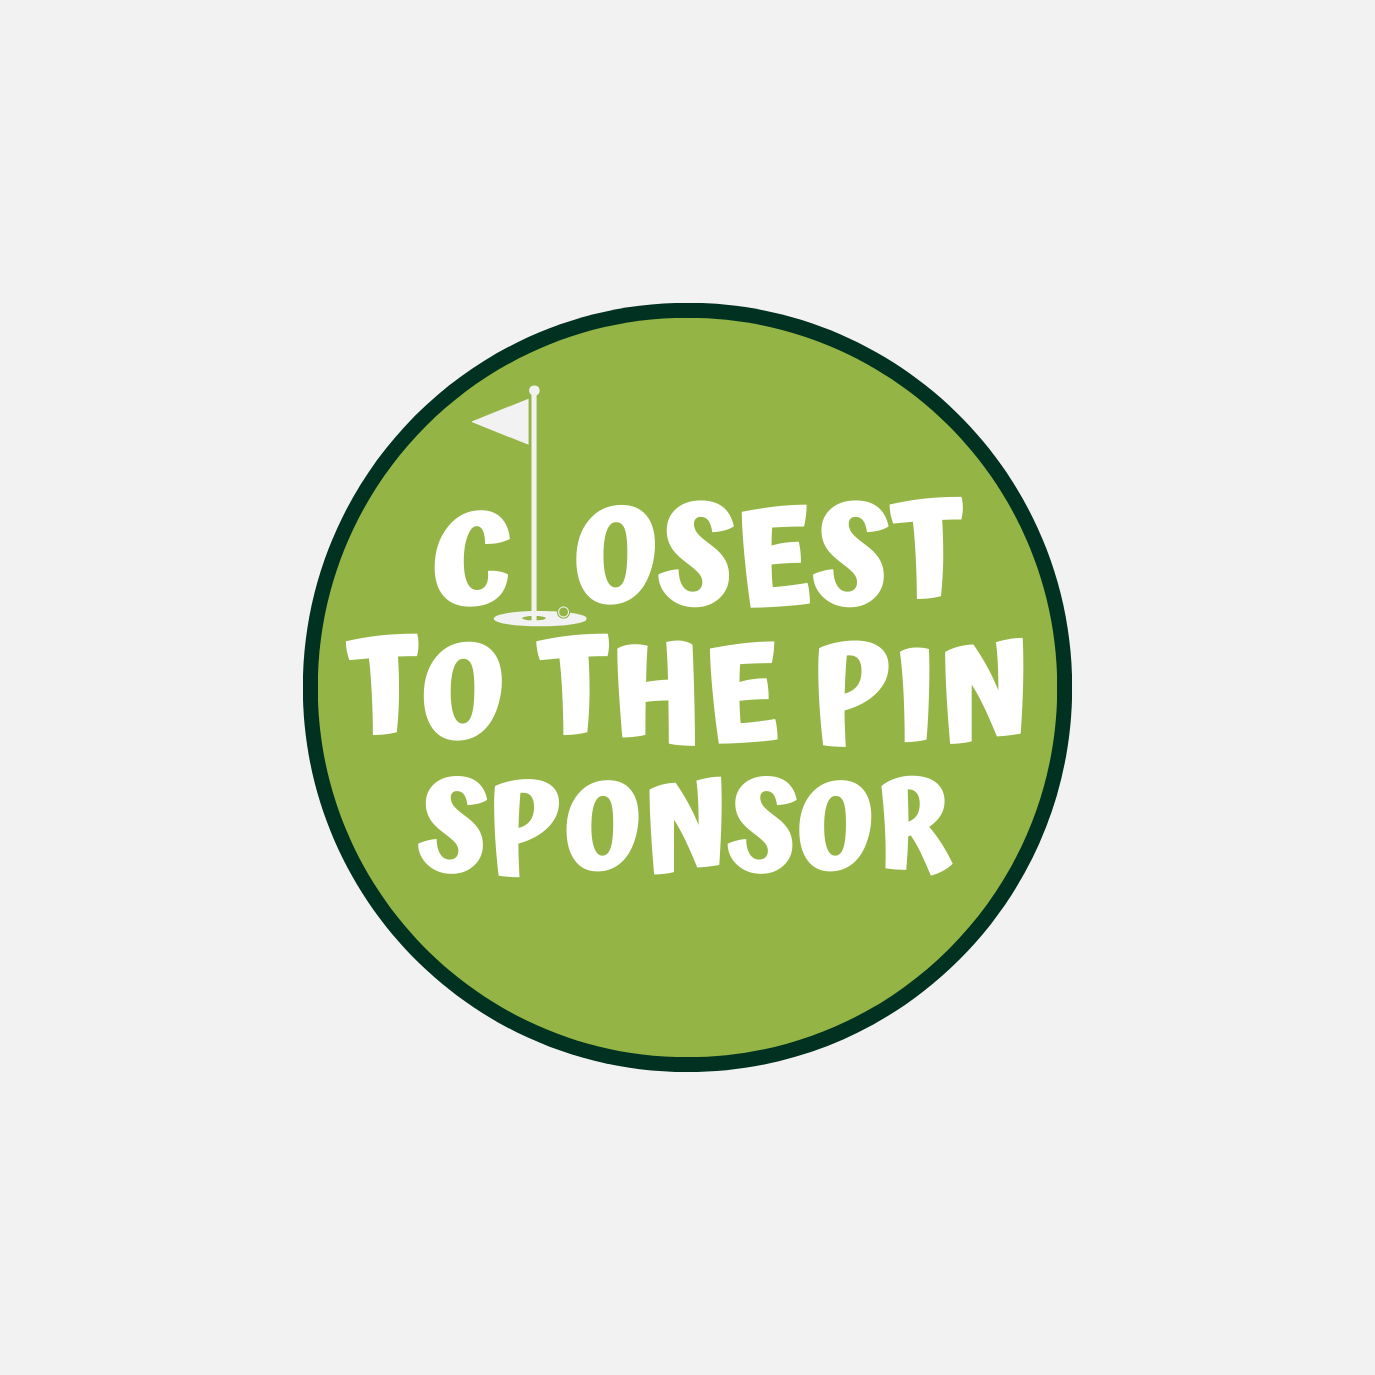 Closest to the Pin Sponsor